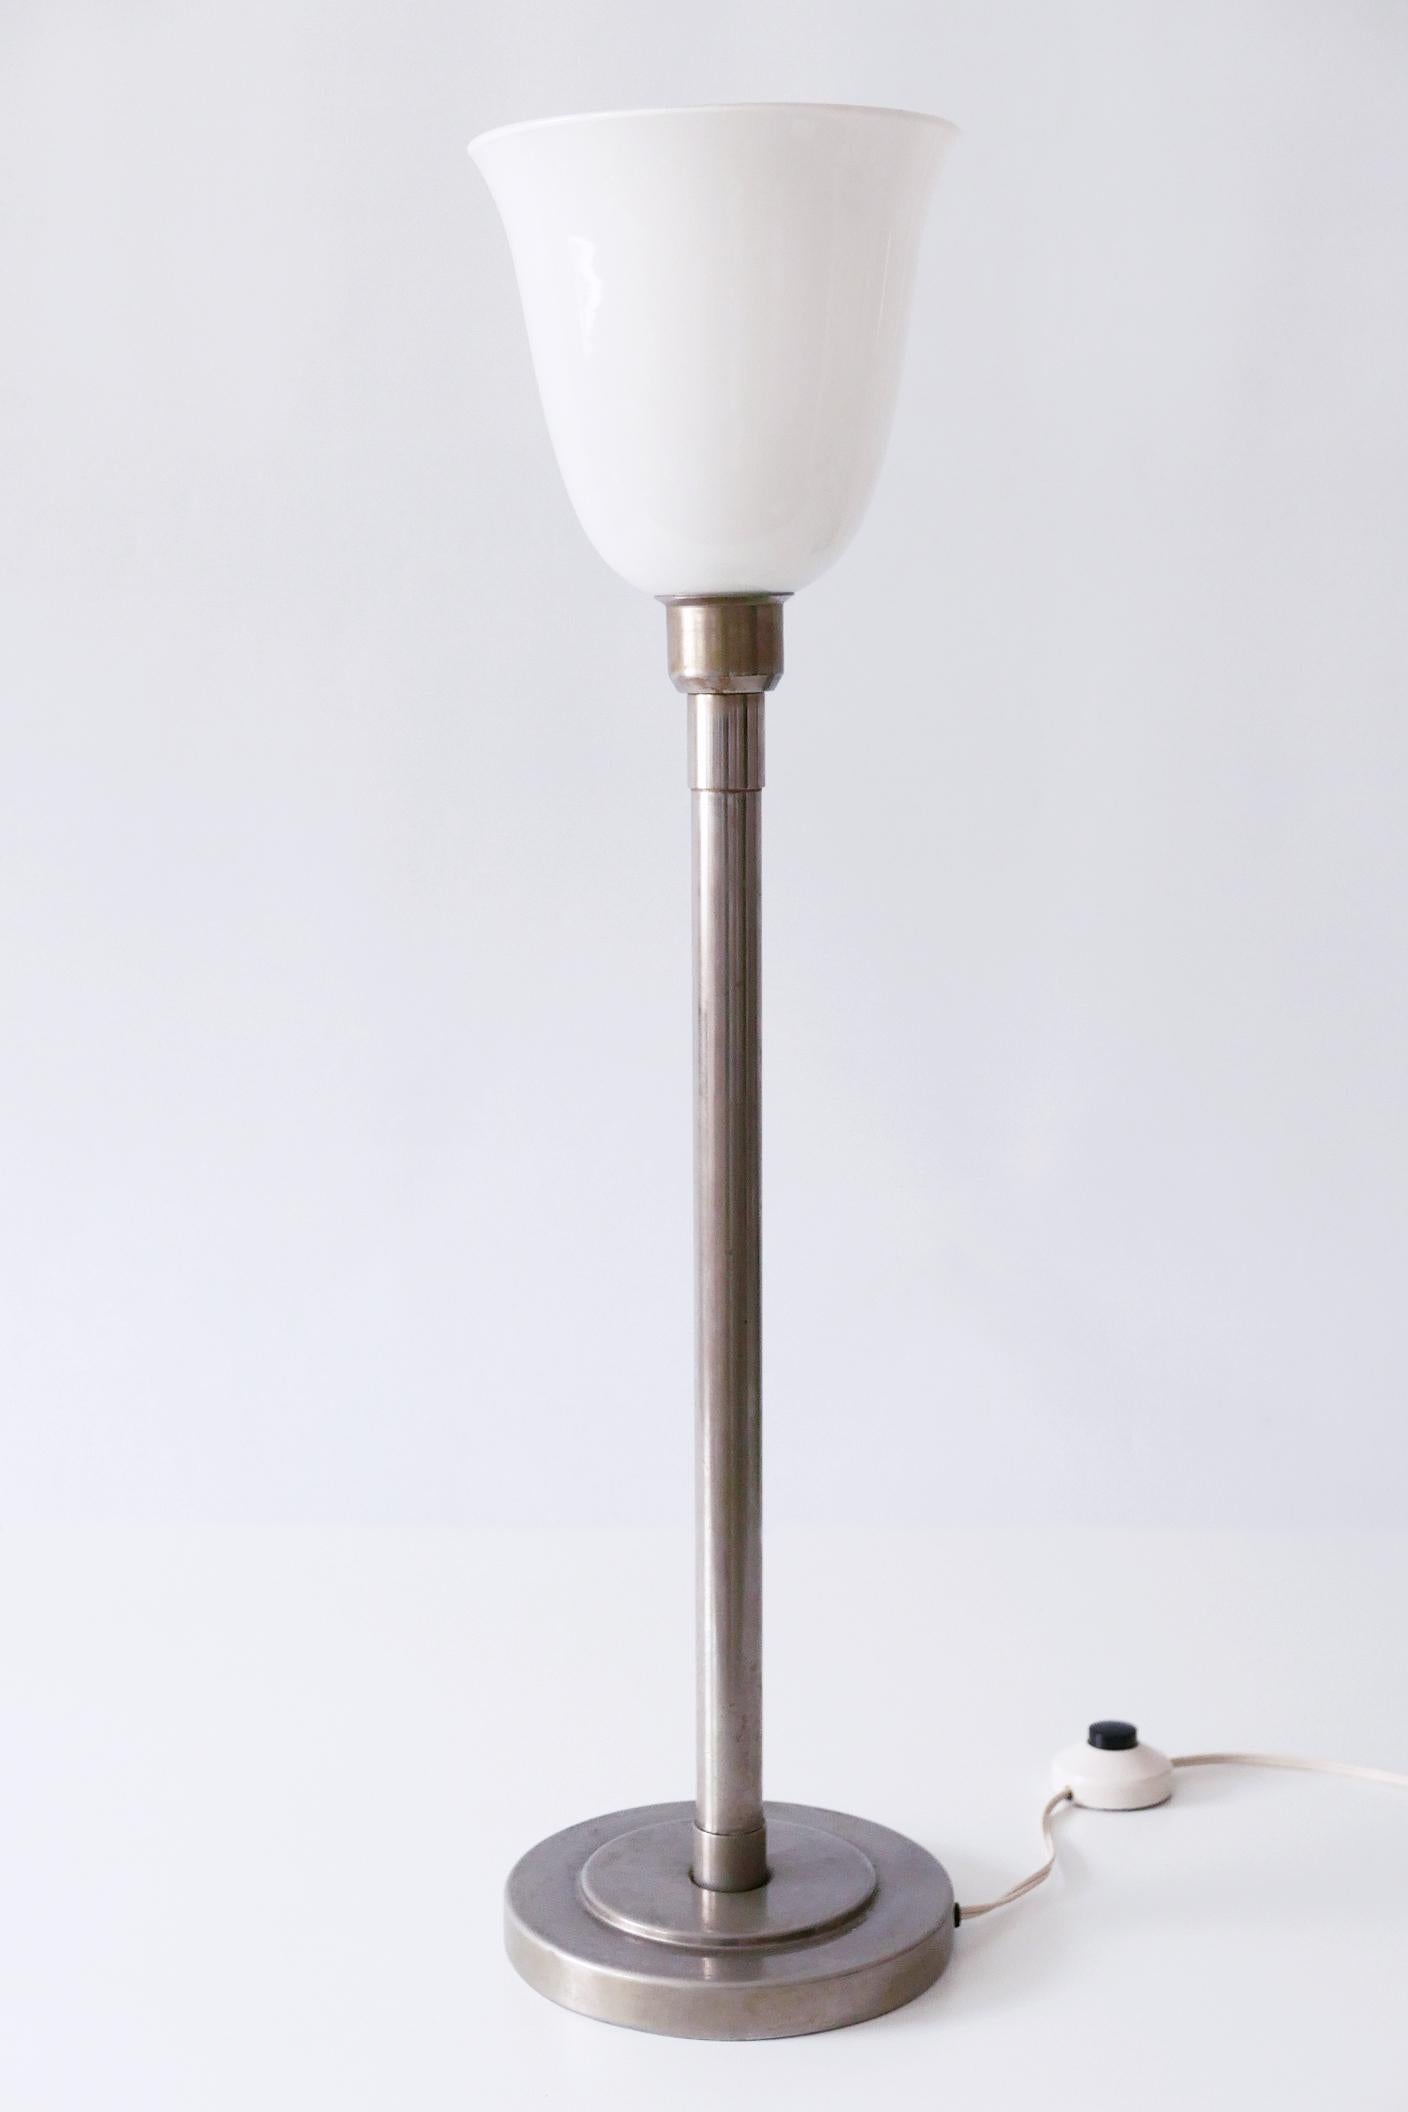 Elegant Art Deco / Bauhaus floor or table lamp. Designed and manufactured probably in 1930s, Italy.

Executed in nickel-plated brass and opaline glass, the lamp needs 1 x E27 / E 26 Edison screw fit bulb, is wired, and in working condition. It runs